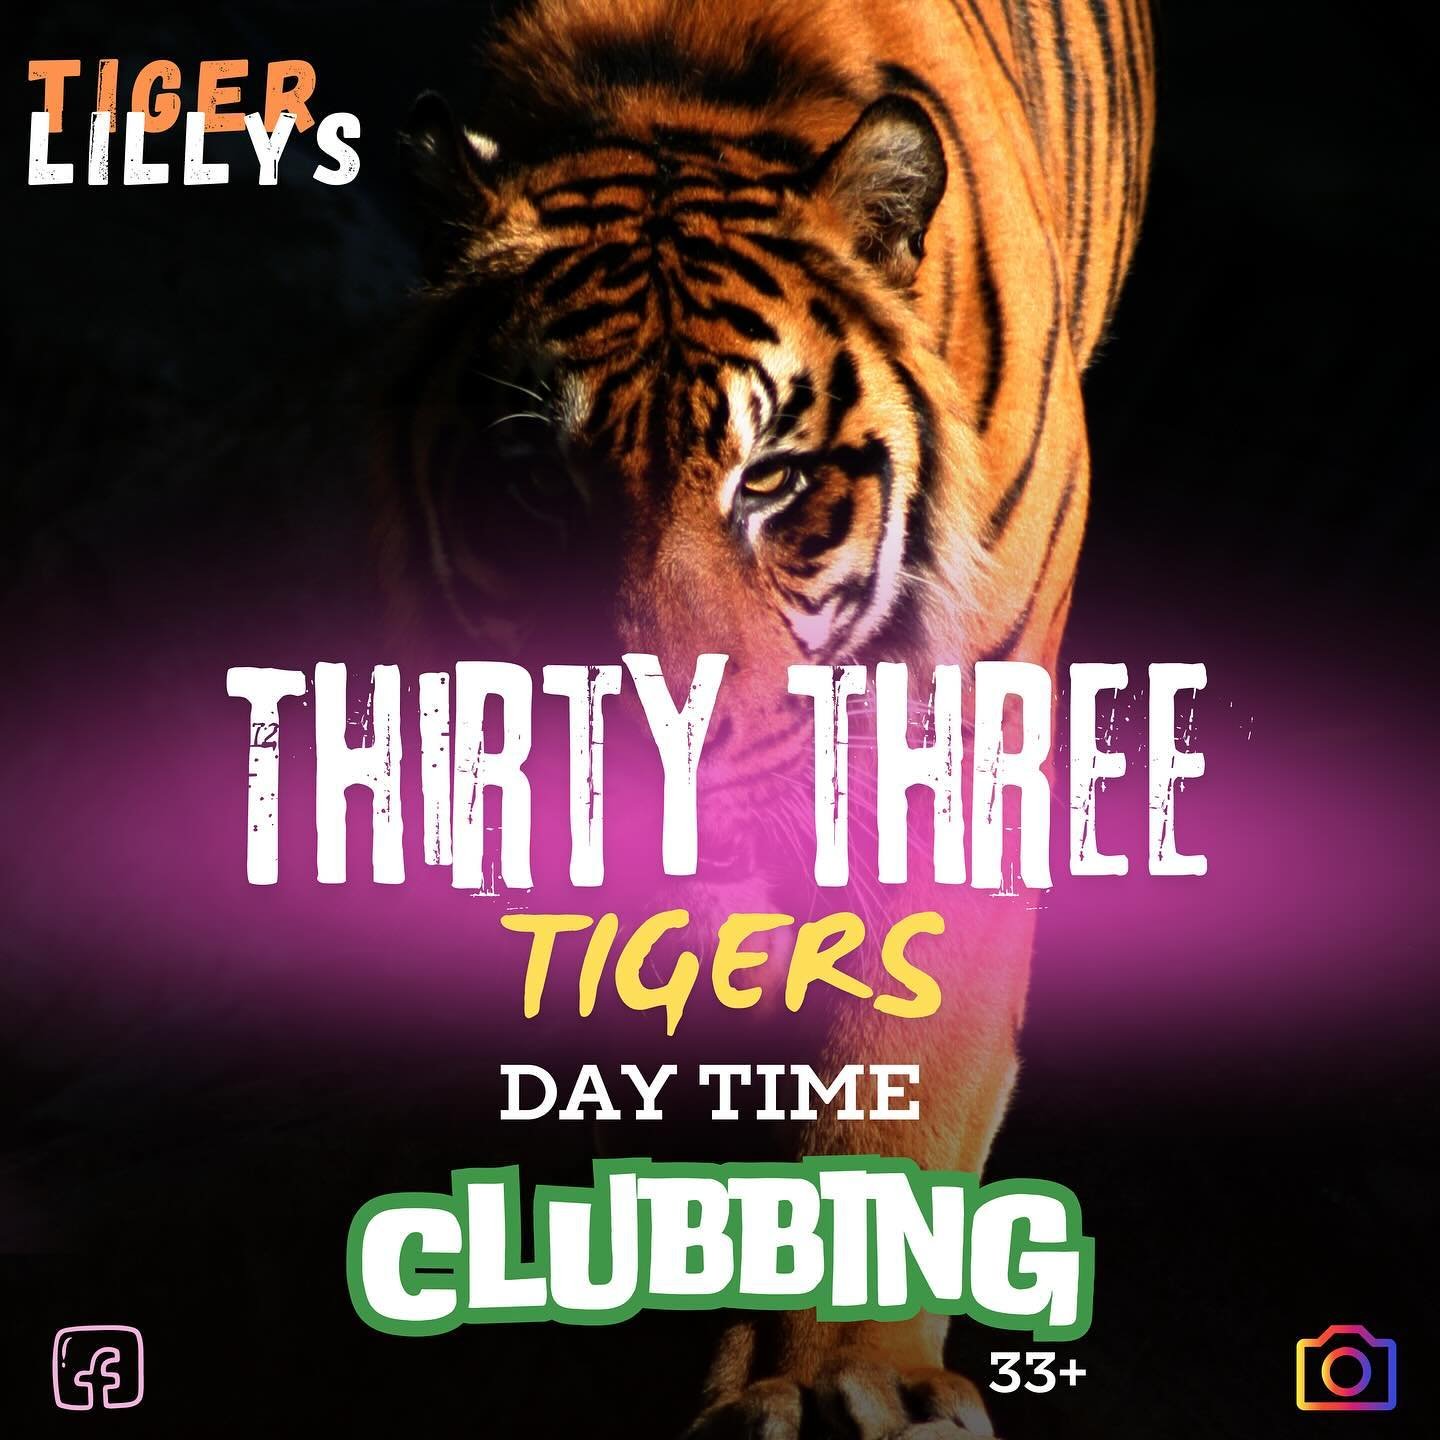 🐯 𝗧 𝗛 𝗜 𝗥 𝗧 𝗬  𝗧 𝗛 𝗥 𝗘 𝗘  𝗧 𝗜 𝗚 𝗘 𝗥 𝗦 🐯 
D A Y  T I M E  C L U B B I N G
𝕔𝕠𝕞𝕚𝕟𝕘 𝕥𝕠 𝕆𝕞𝕒𝕘𝕙 𝕥𝕙𝕚𝕤 𝕊𝕦𝕞𝕞𝕖𝕣
keep your 👀 peeled for the deets!! 
Live DJ Sets ✅ 
Entertainment Galore ✅ 
Party Games ✅ 
Prizes to be wo